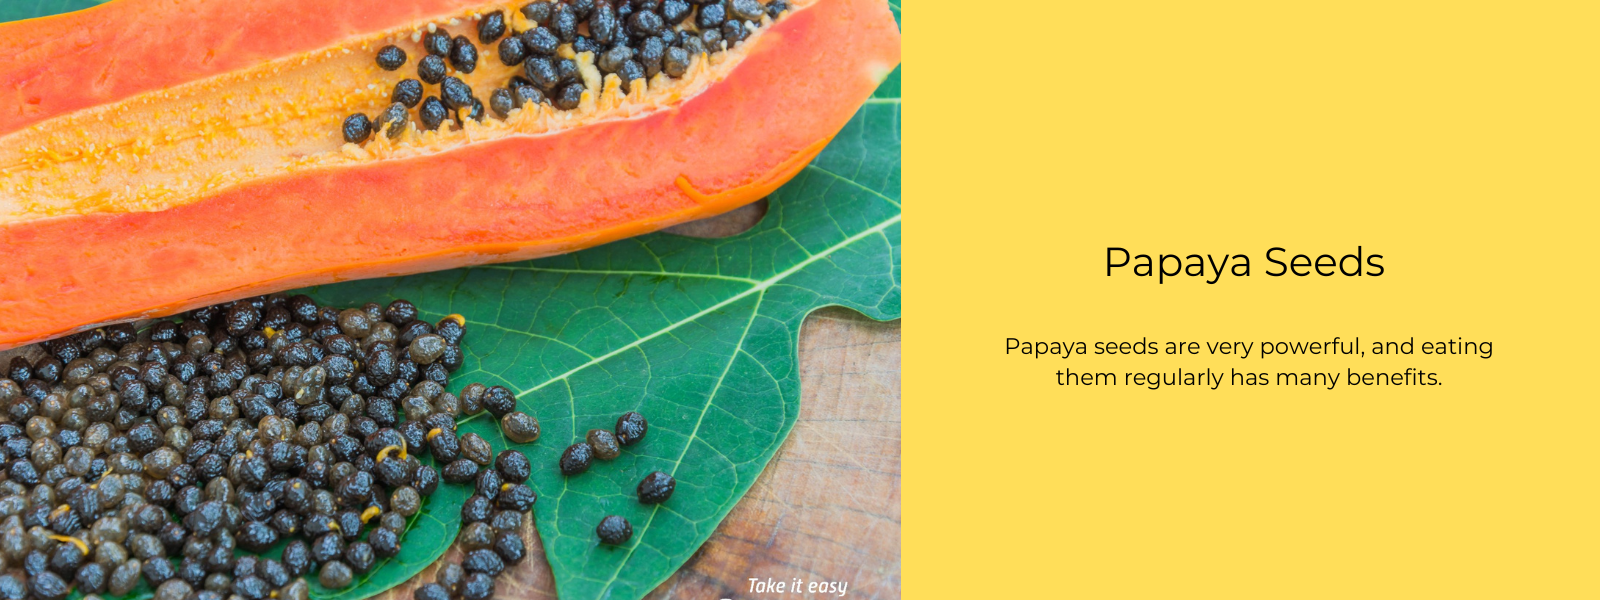 Papaya Seeds – Health Benefits, Uses and Important Facts